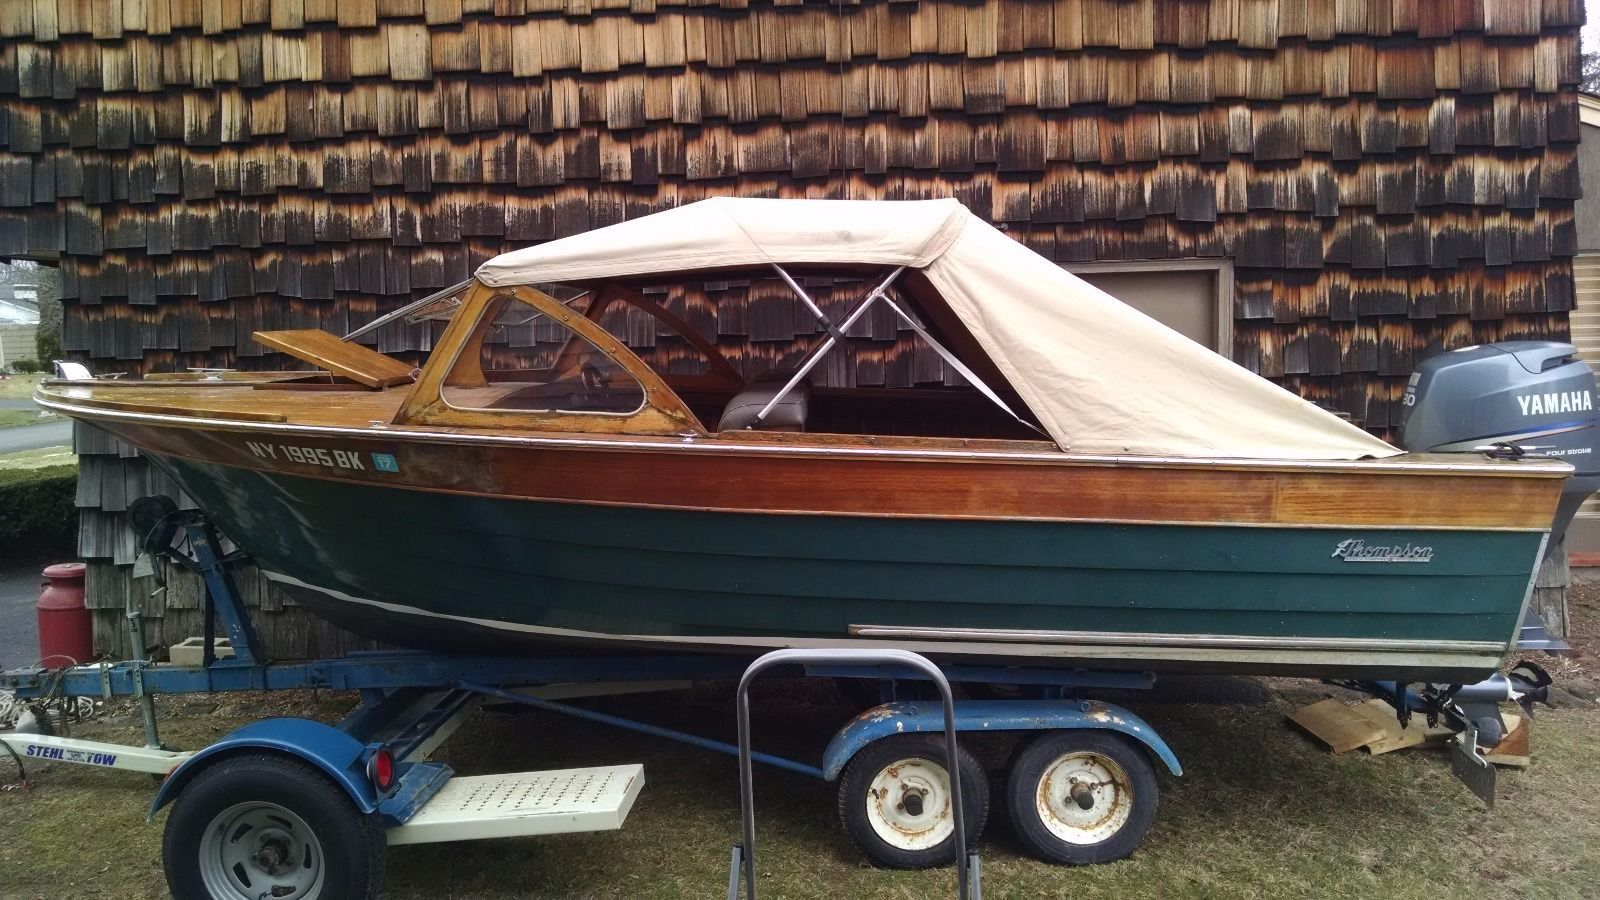 Thompson Runabout 1963 for sale for $100 - Boats-from-USA.com